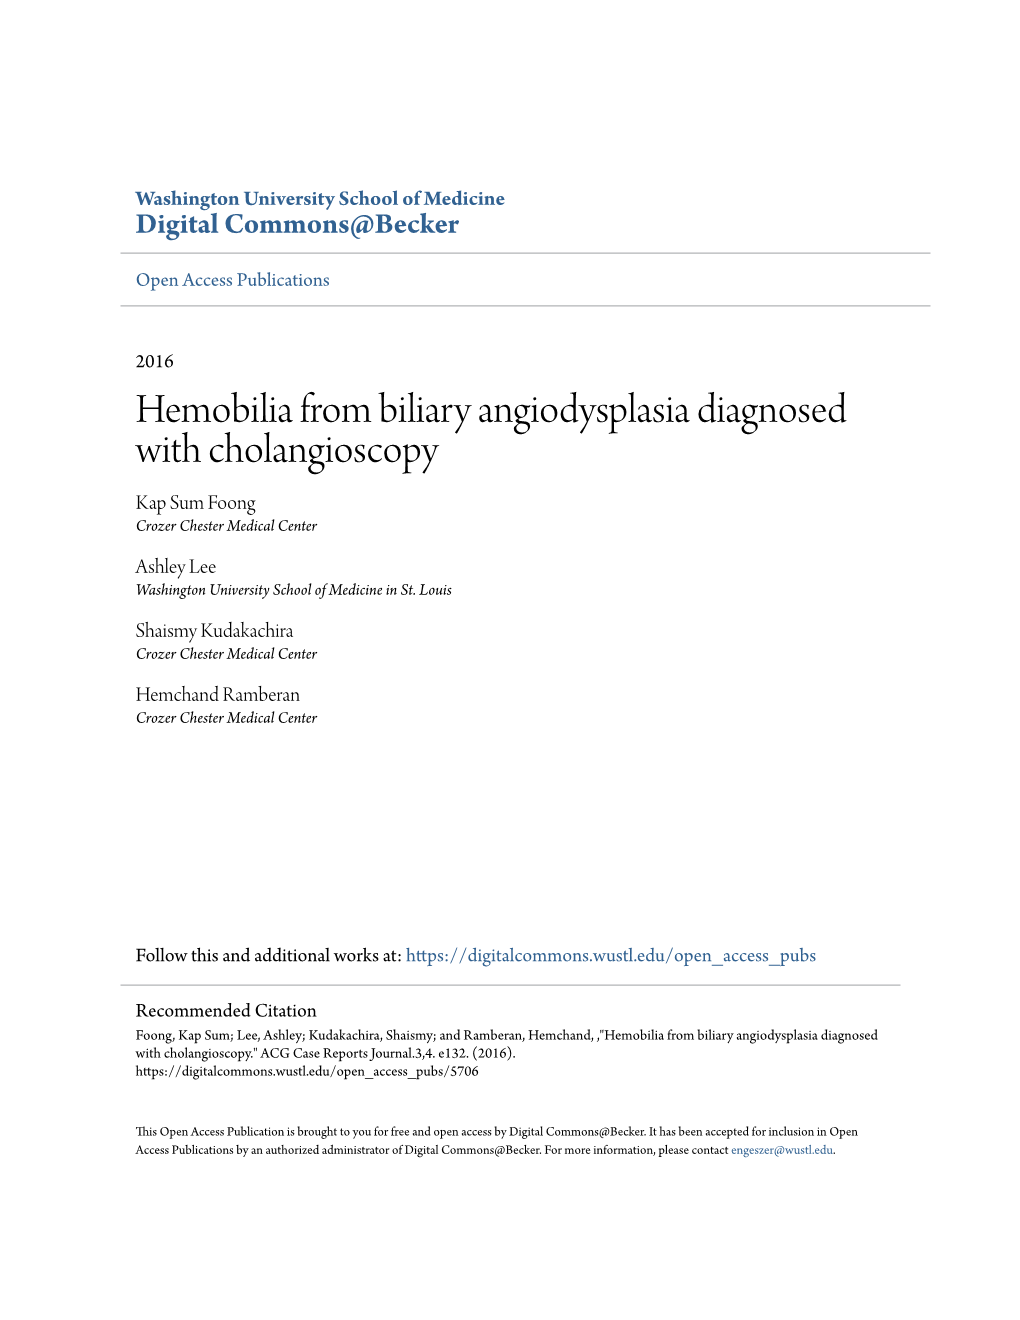 Hemobilia from Biliary Angiodysplasia Diagnosed with Cholangioscopy Kap Sum Foong Crozer Chester Medical Center